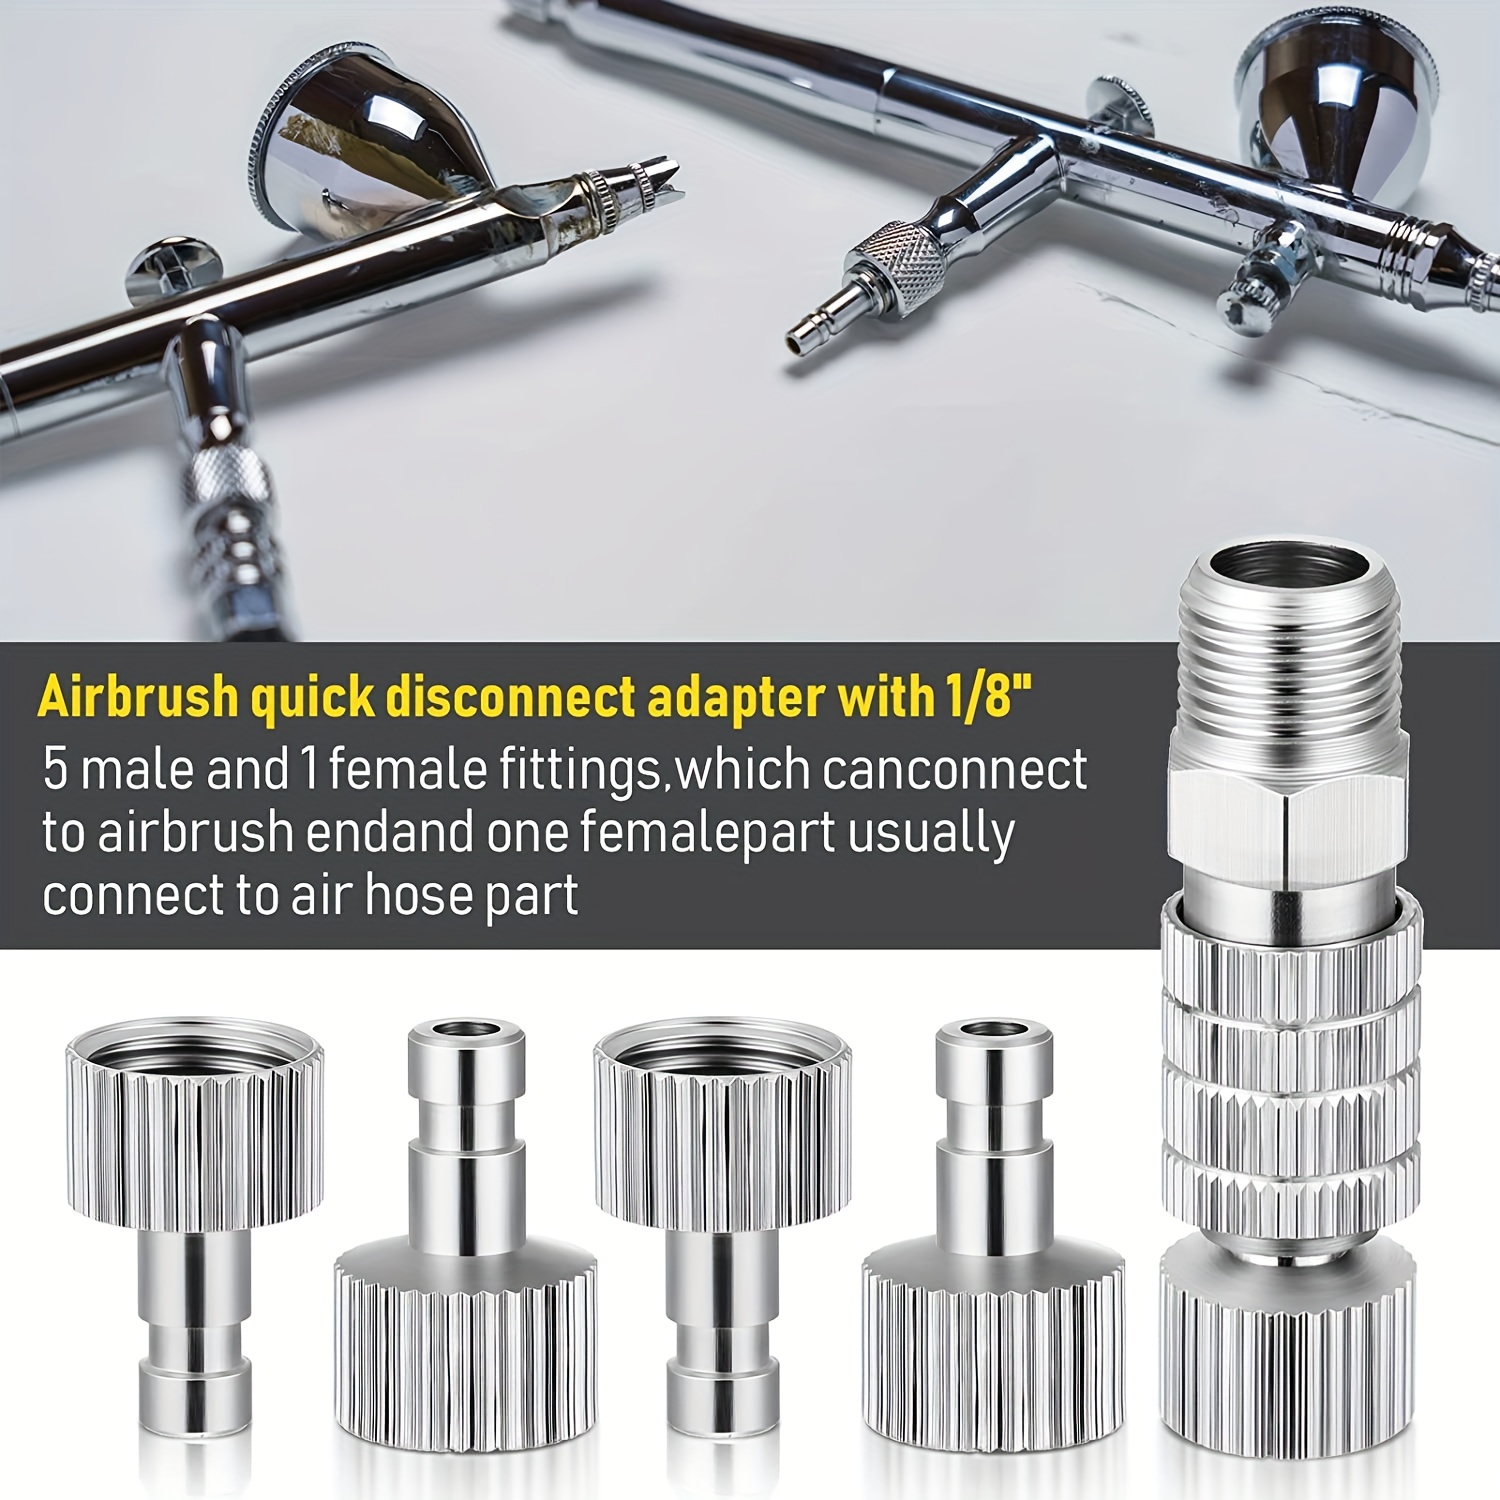 Master Airbrush Brand Airbrush Quick Release Disconnect Coupler with Plug  1/8 in. BSP Male and Female Hose Connections